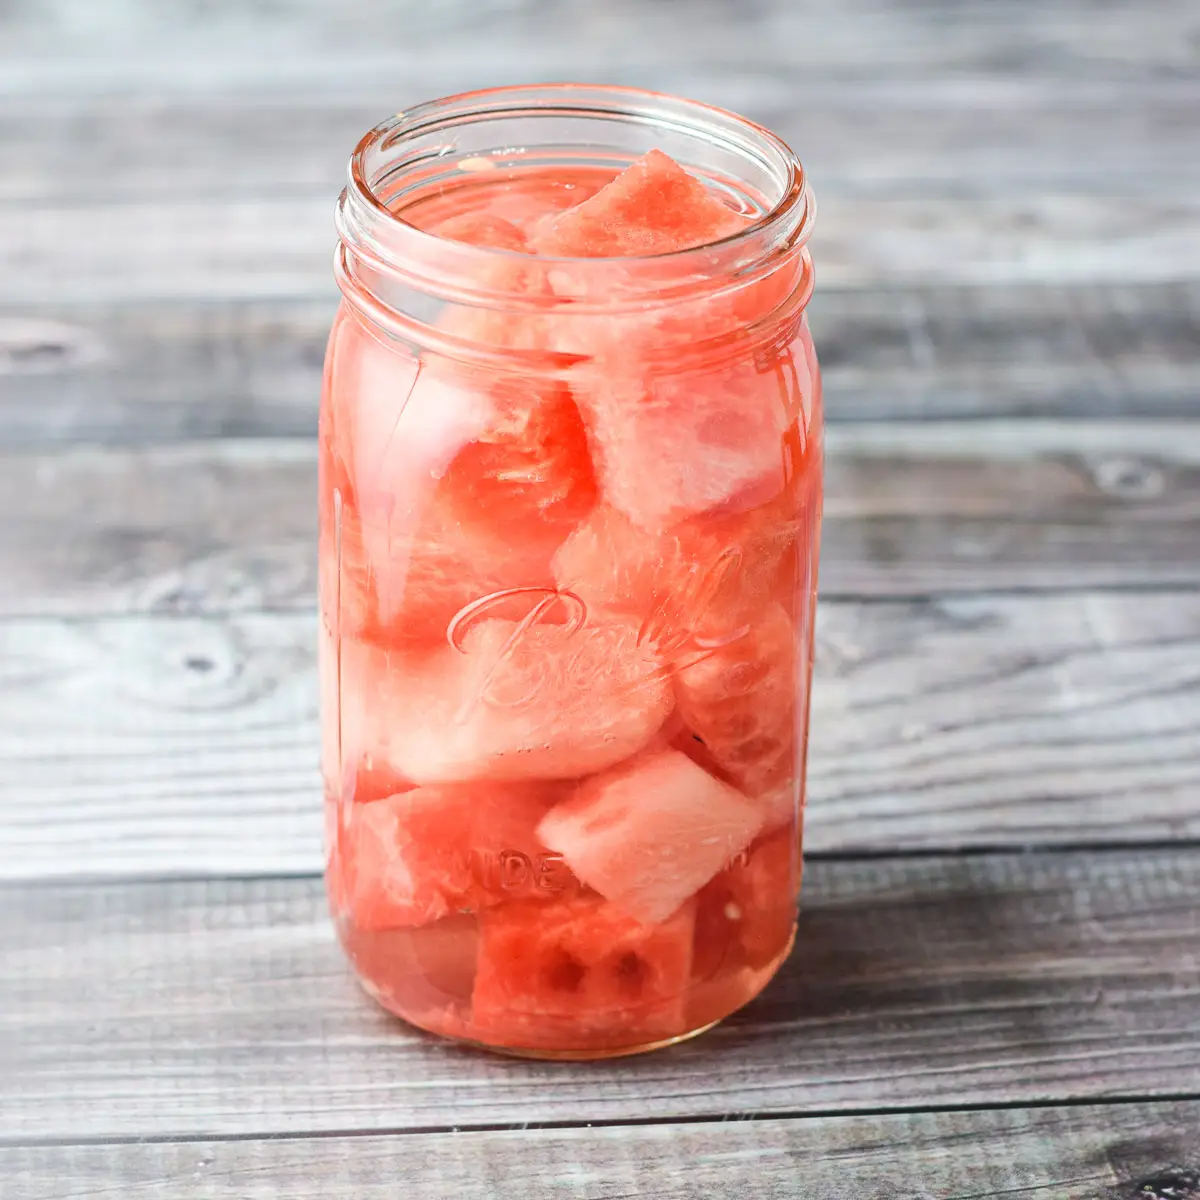 Homemade Watermelon Infused Vodka